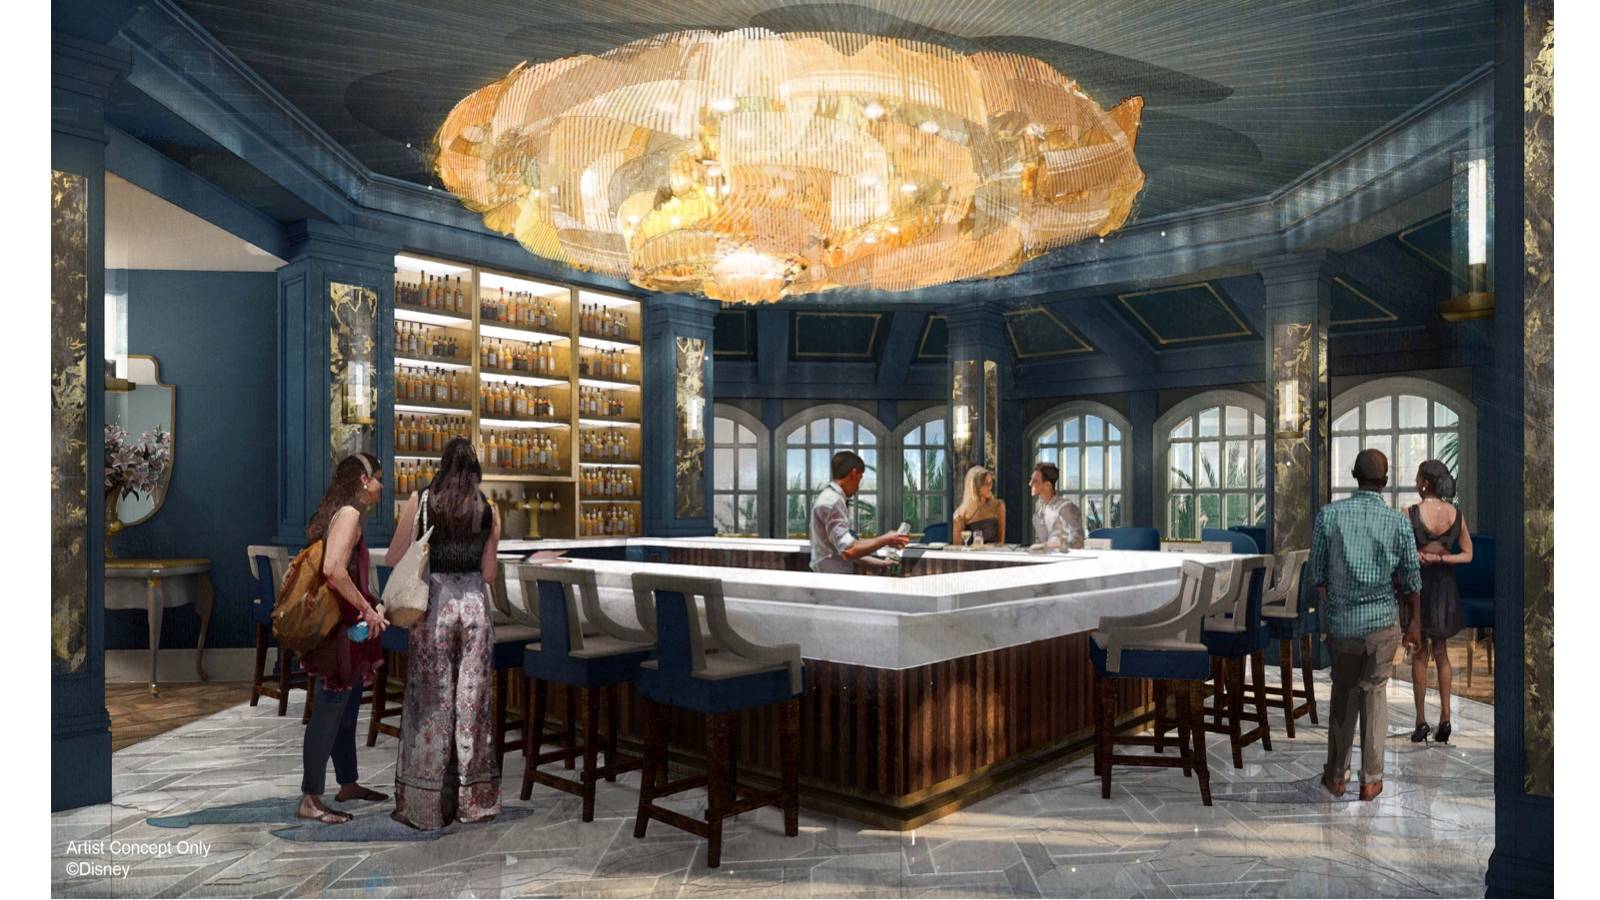 PHOTOS - Details on the new Enchanted Rose lounge to open at Disney's Grand Floridian Resort